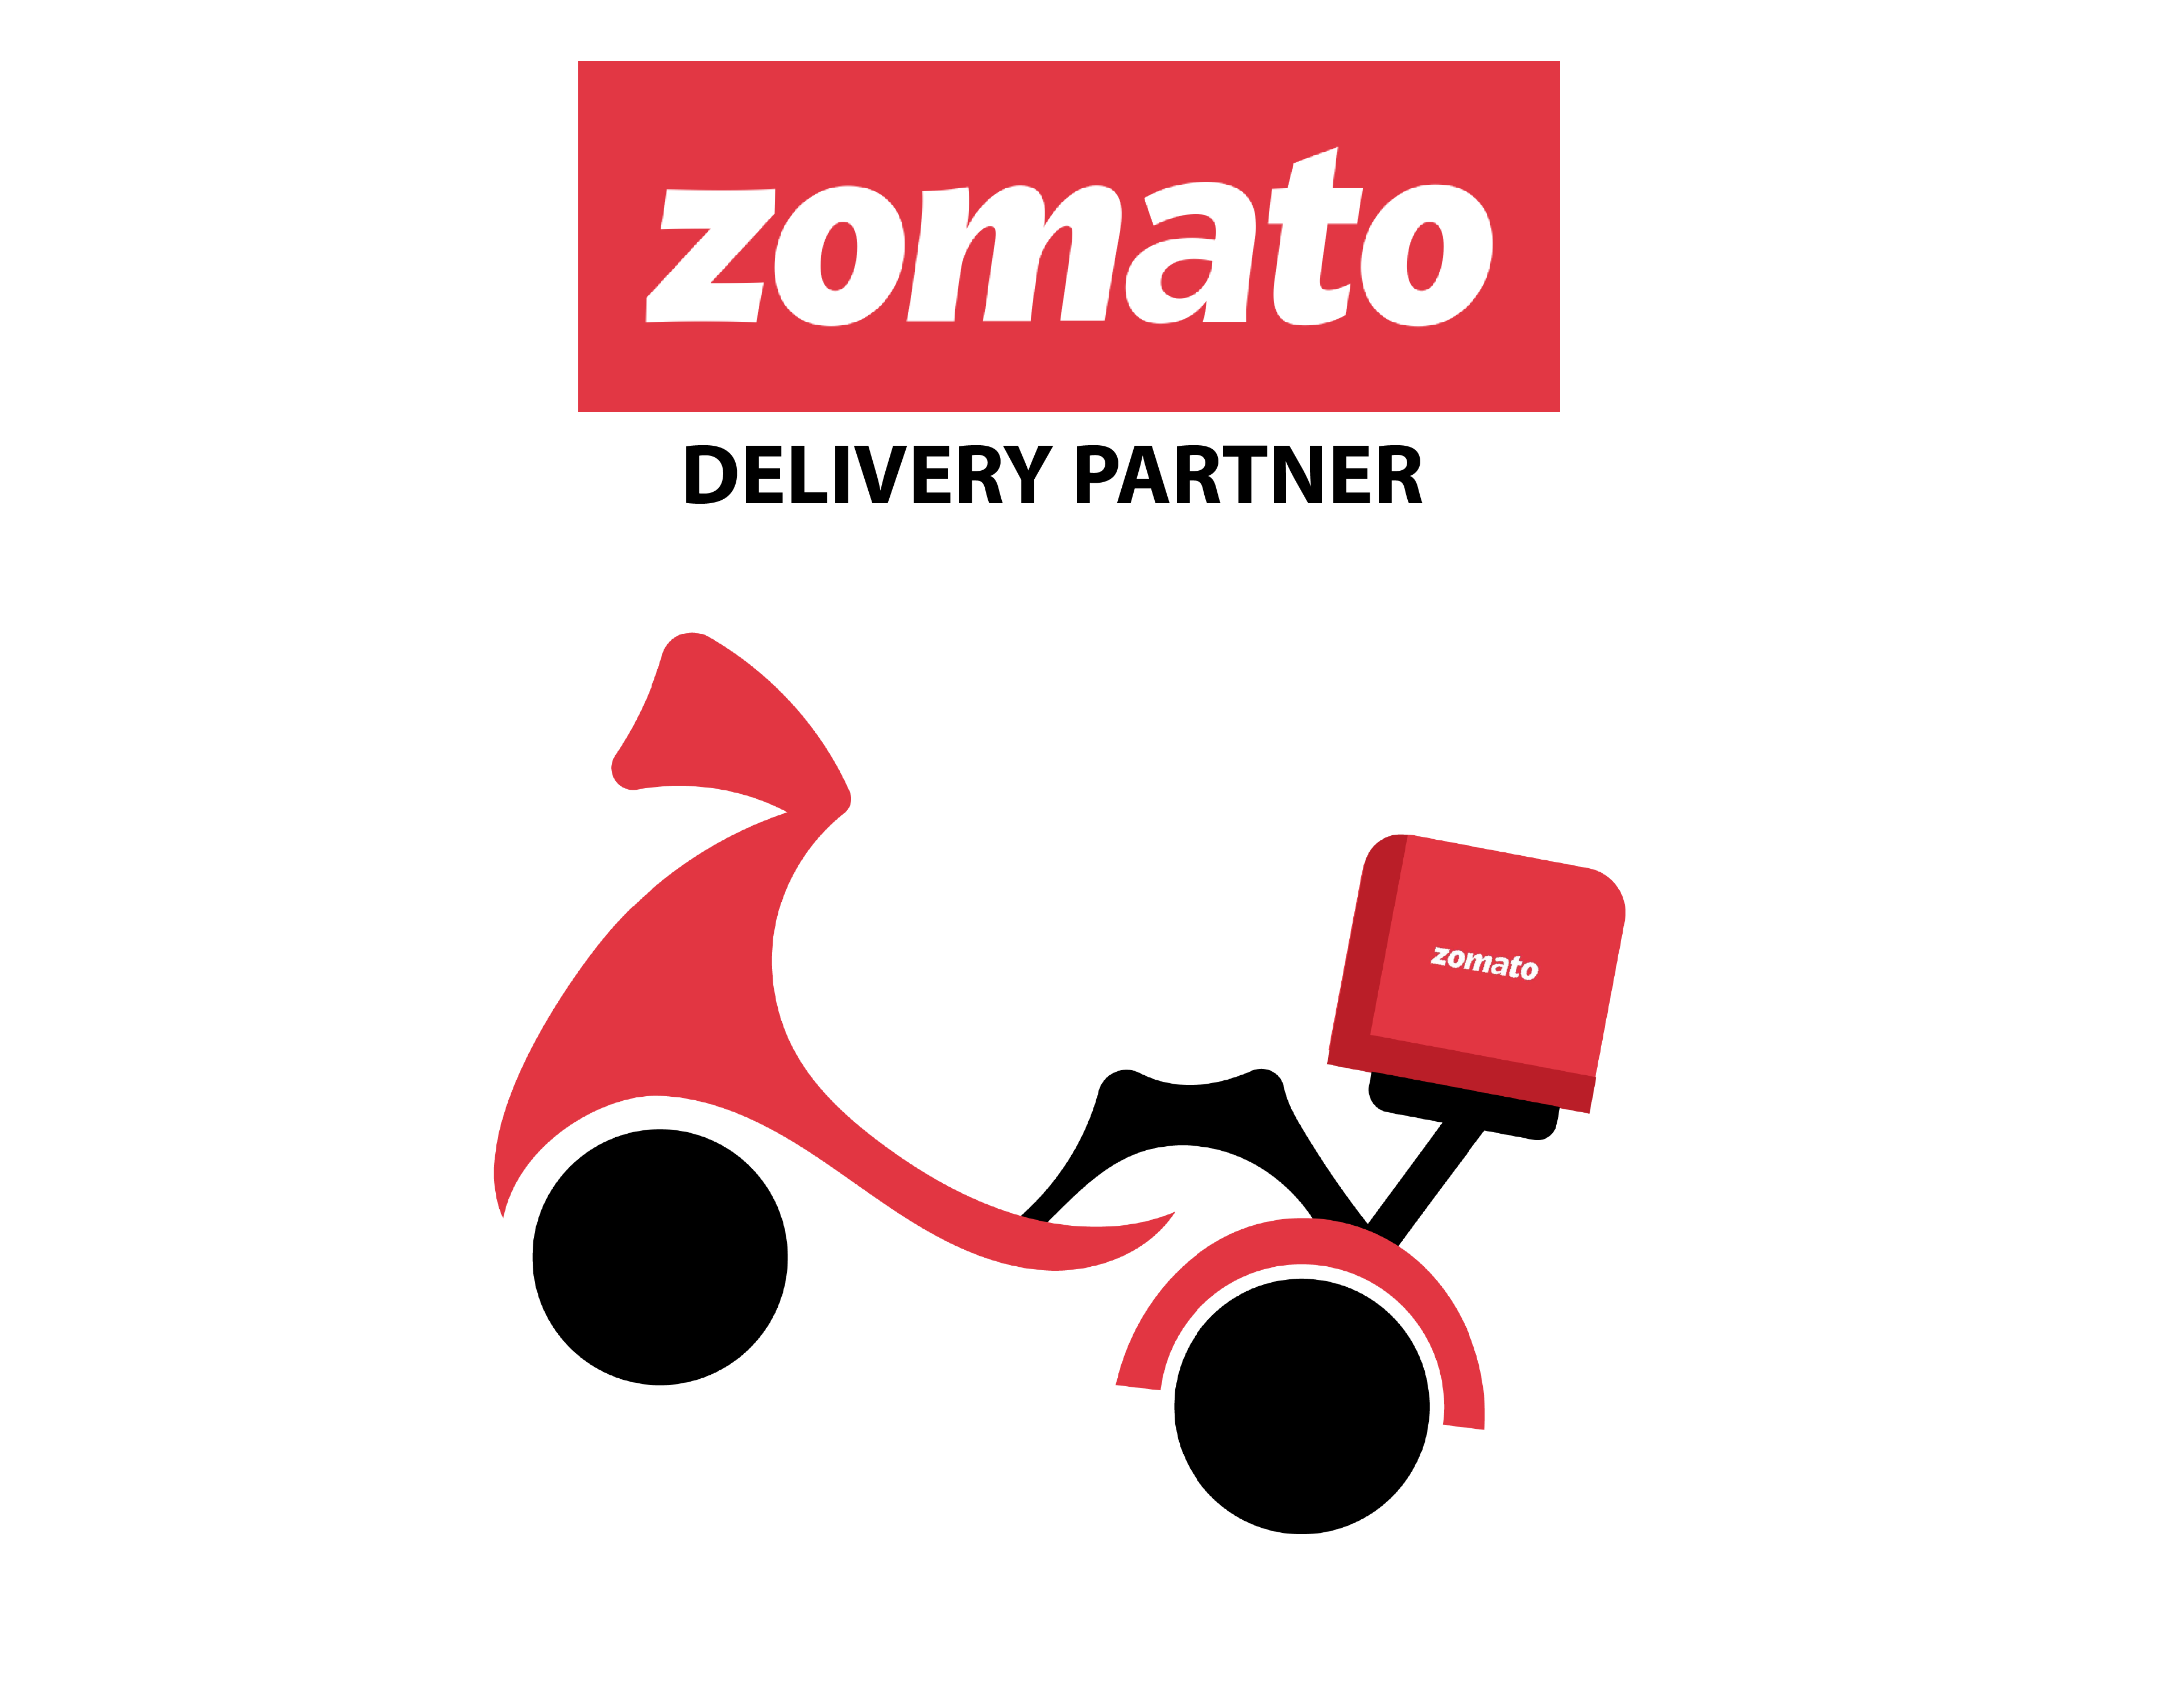 How Zomato Evolved Over The Years